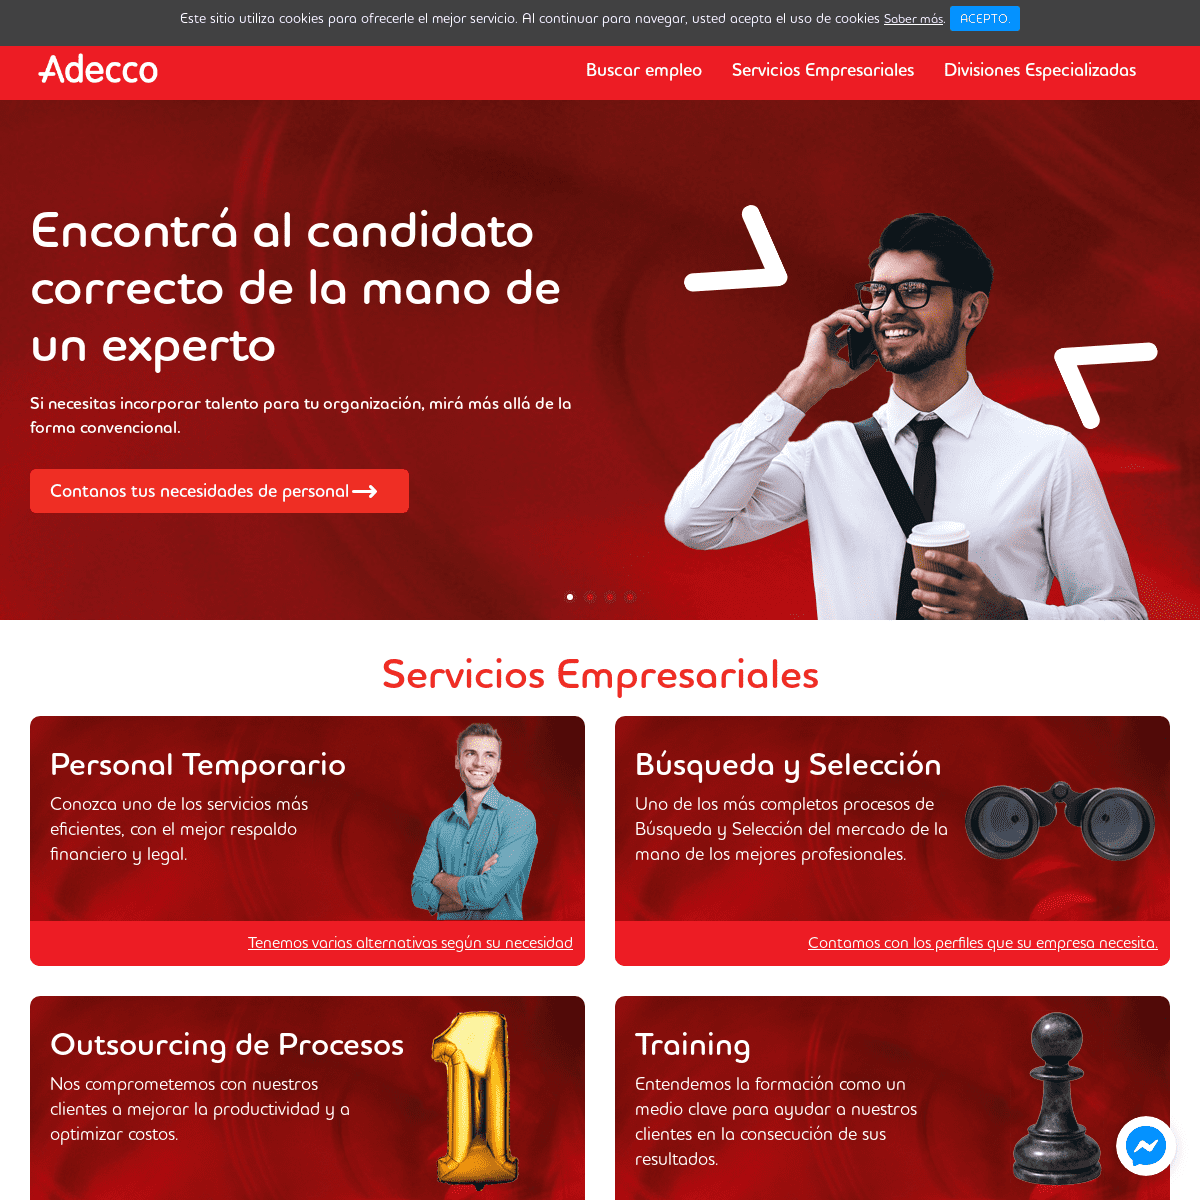 A complete backup of adecco.com.ar